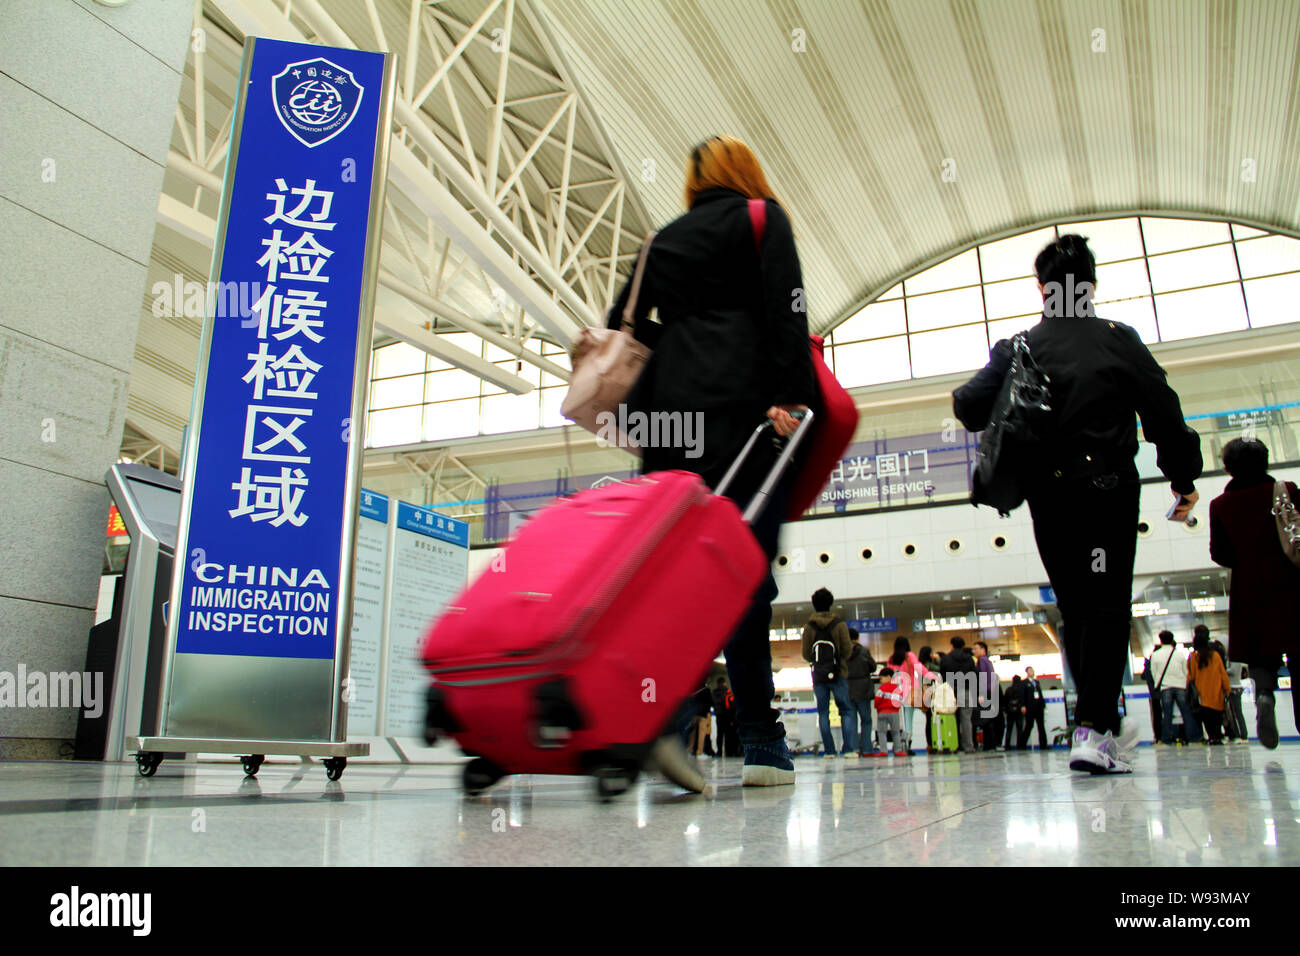 --FILE--Passengers travelling abroad walk past a signboard of China Immigration Inspection at the Qingdao Liuting International Airport in Qingdao, ea Stock Photo